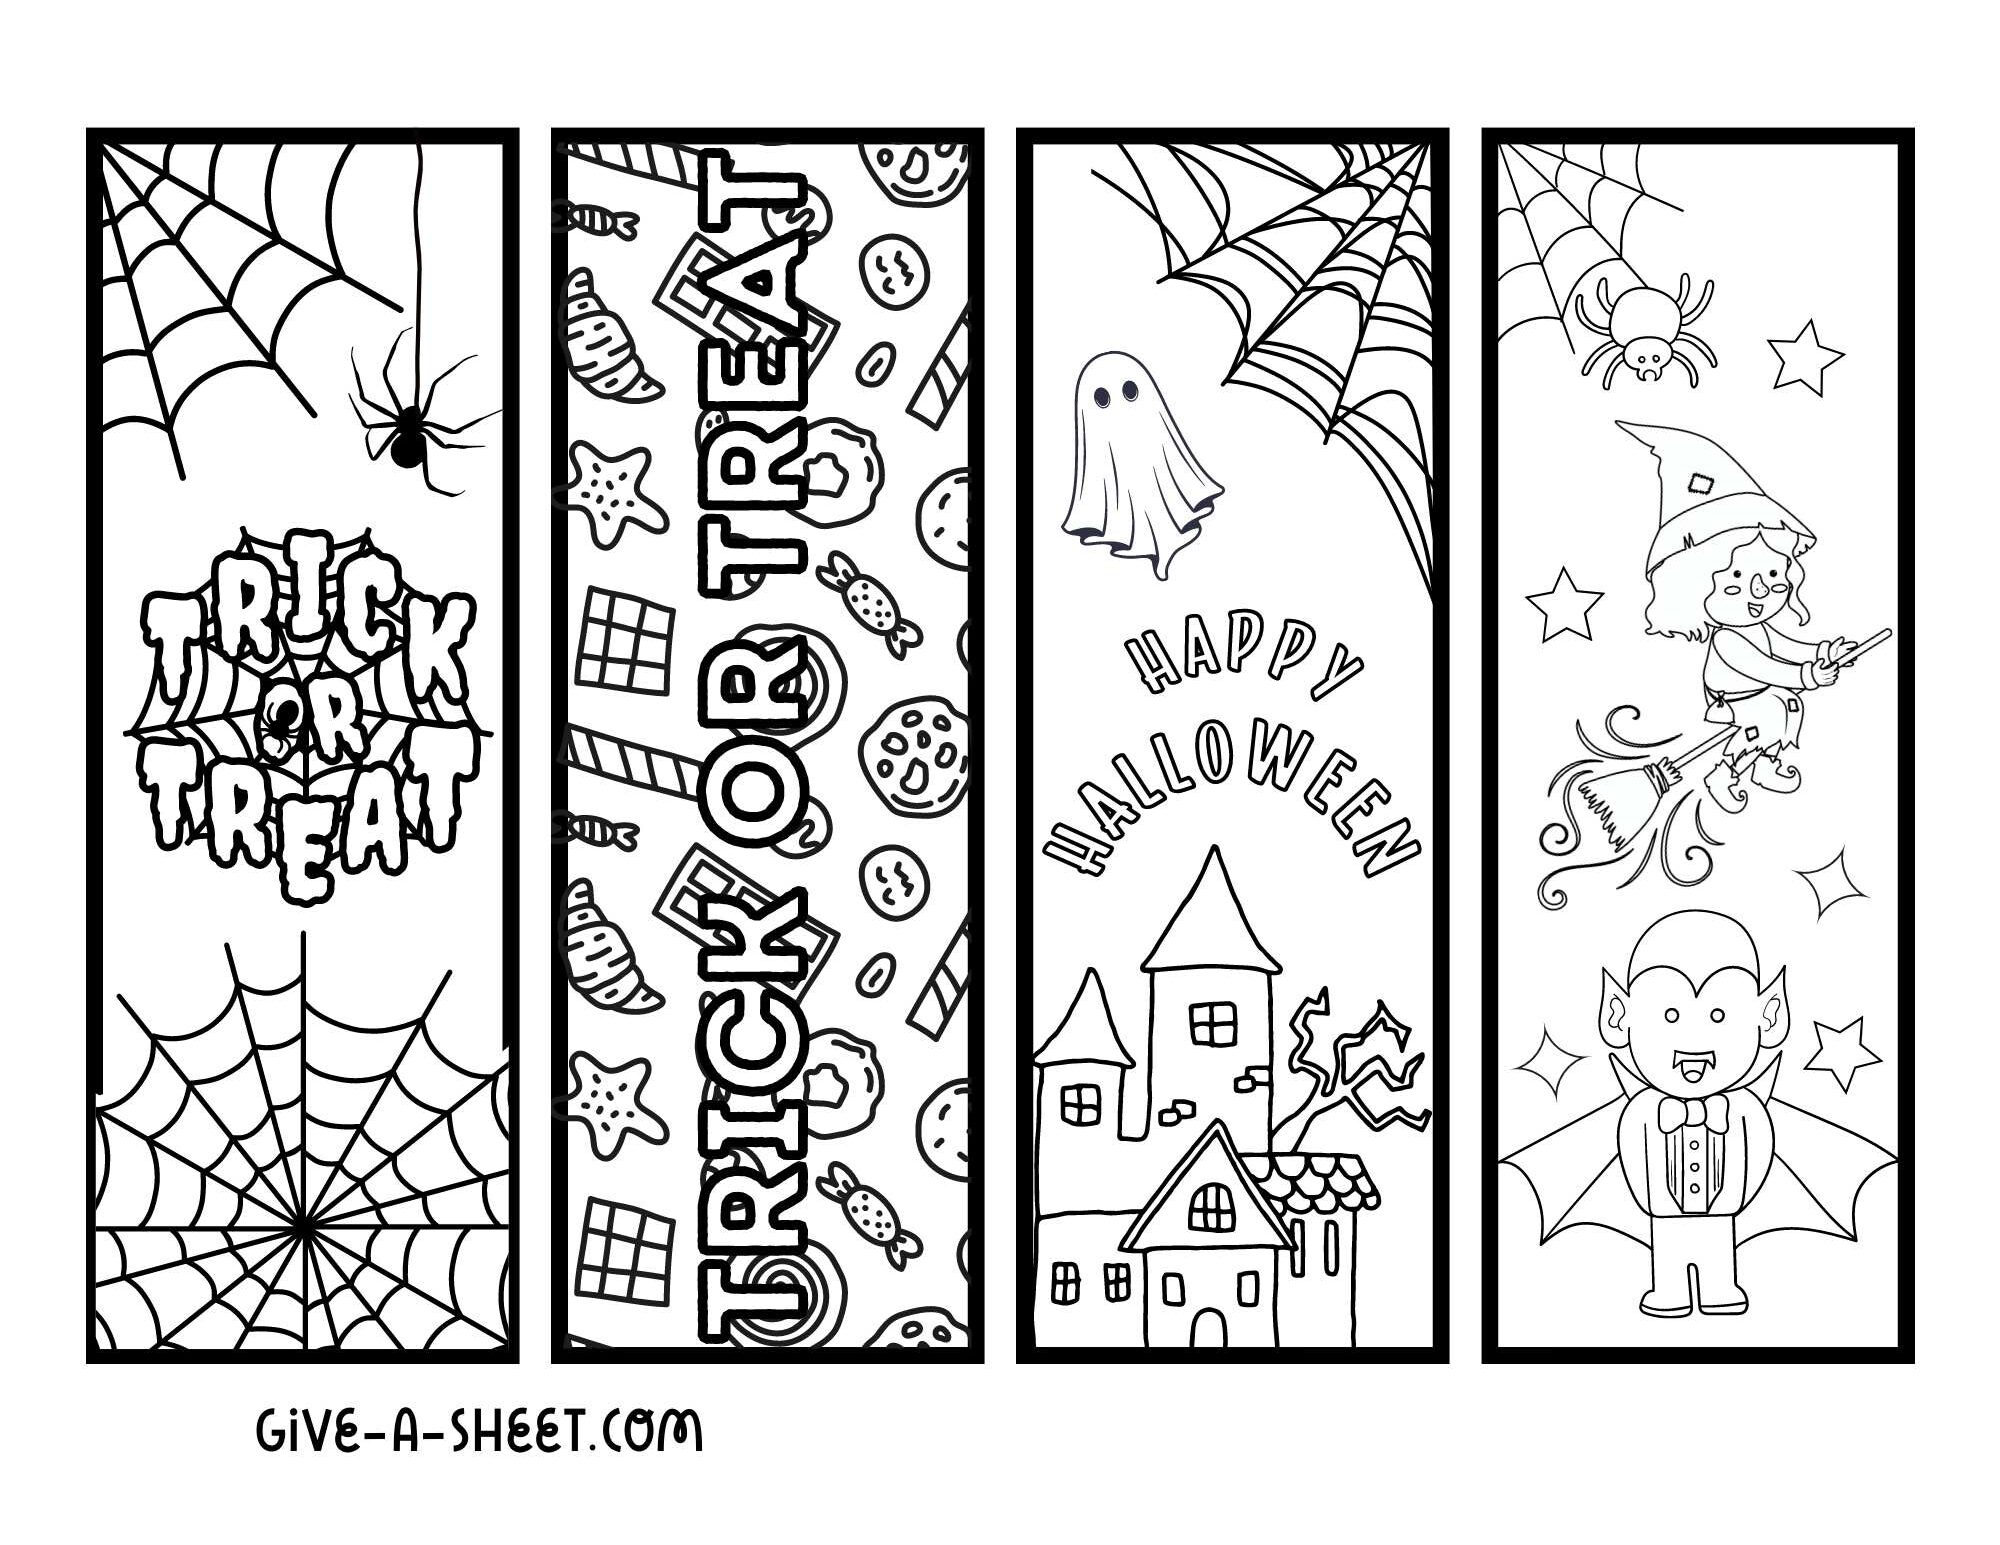 Free printable halloween bookmarks to color.